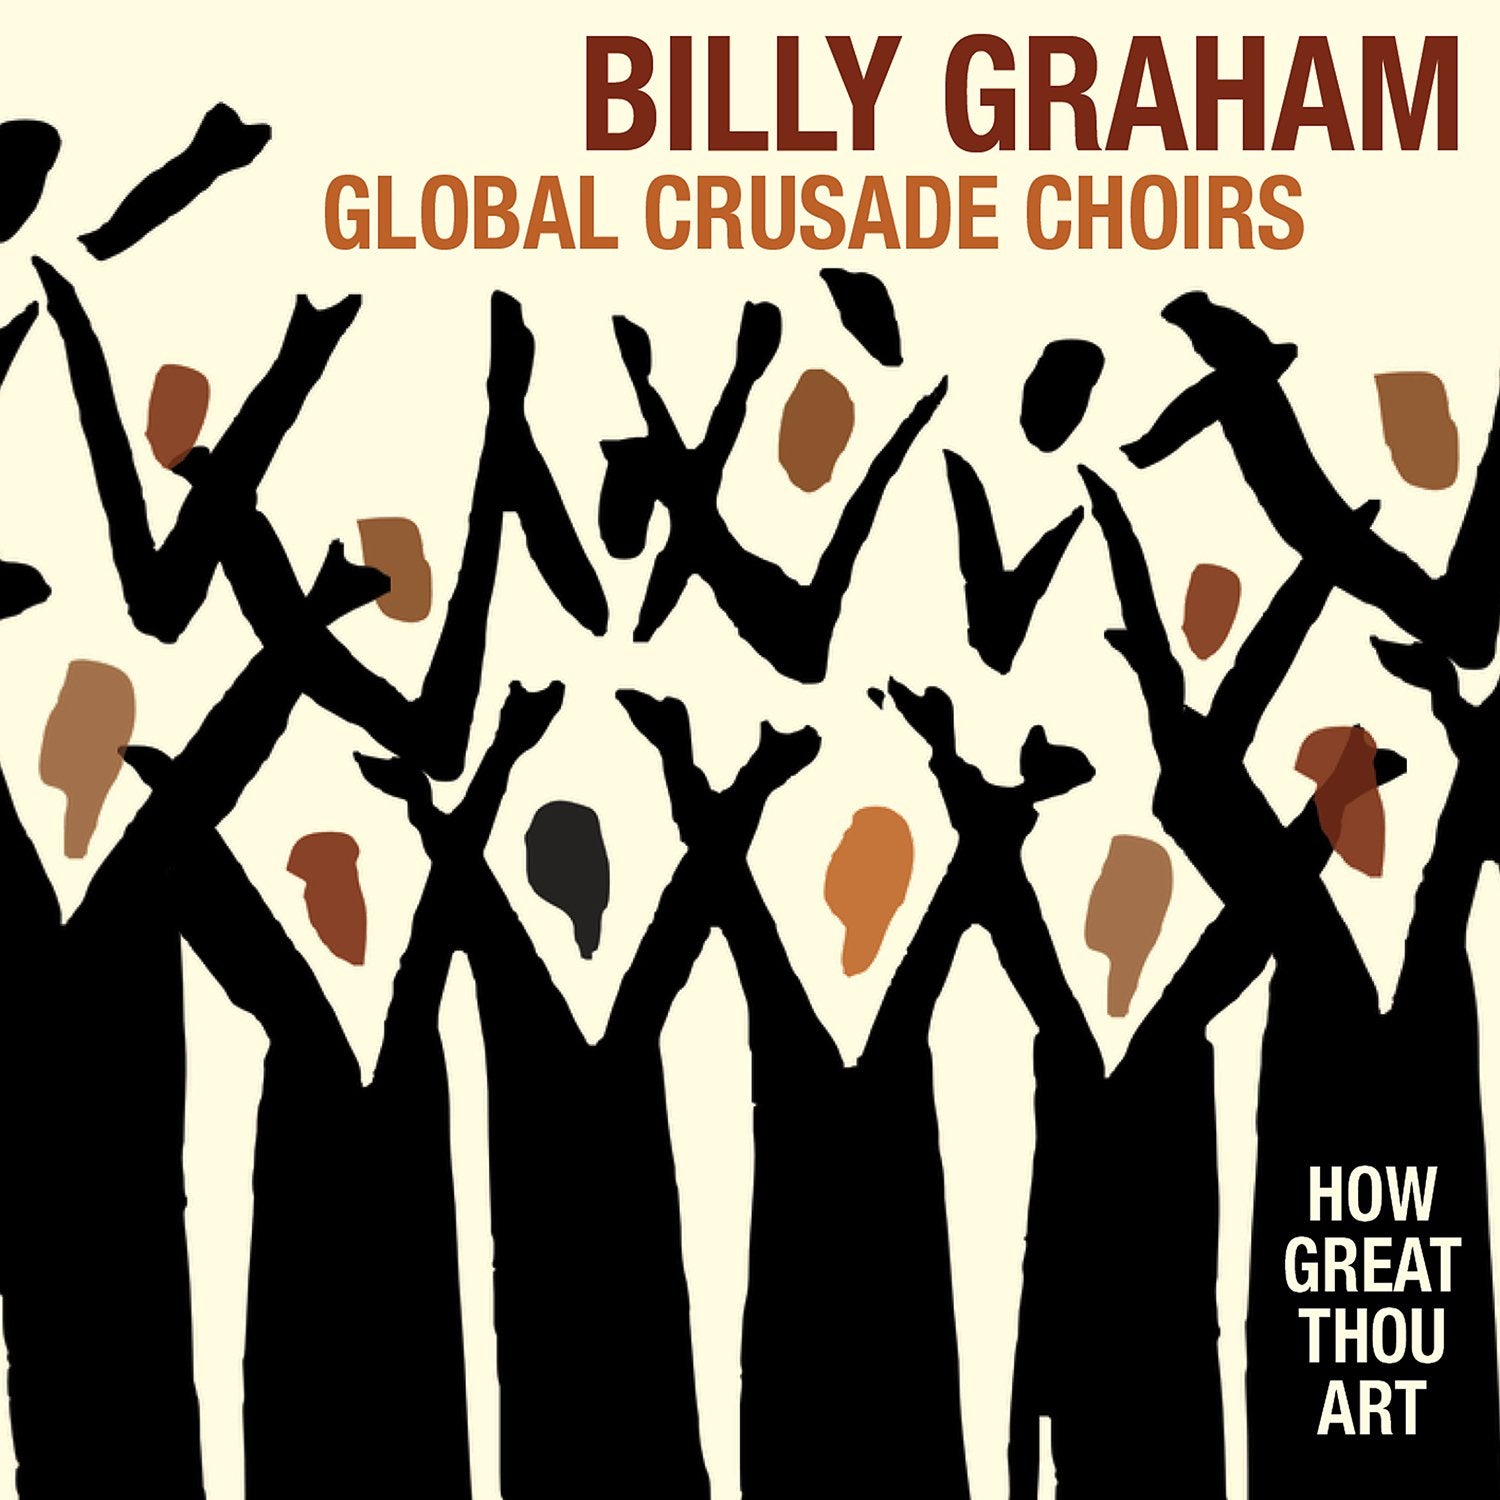 BILLY GRAHAM CRUSADE CHOIRS - HOW GREAT THOU ART